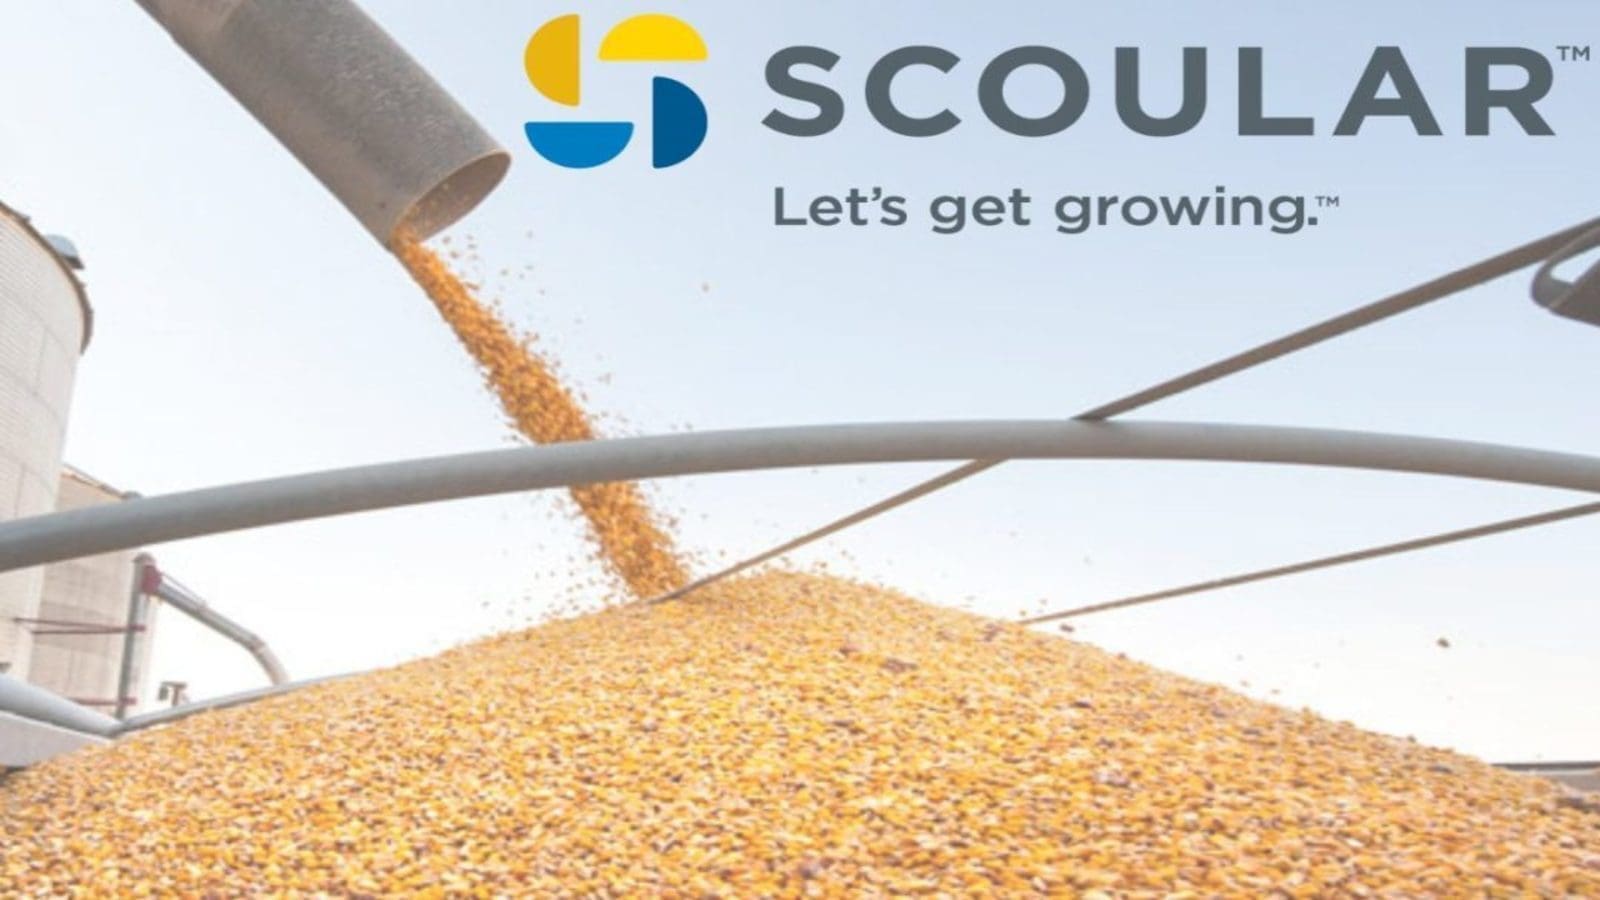 Scoular highlights progress made thus far in second annual sustainability report